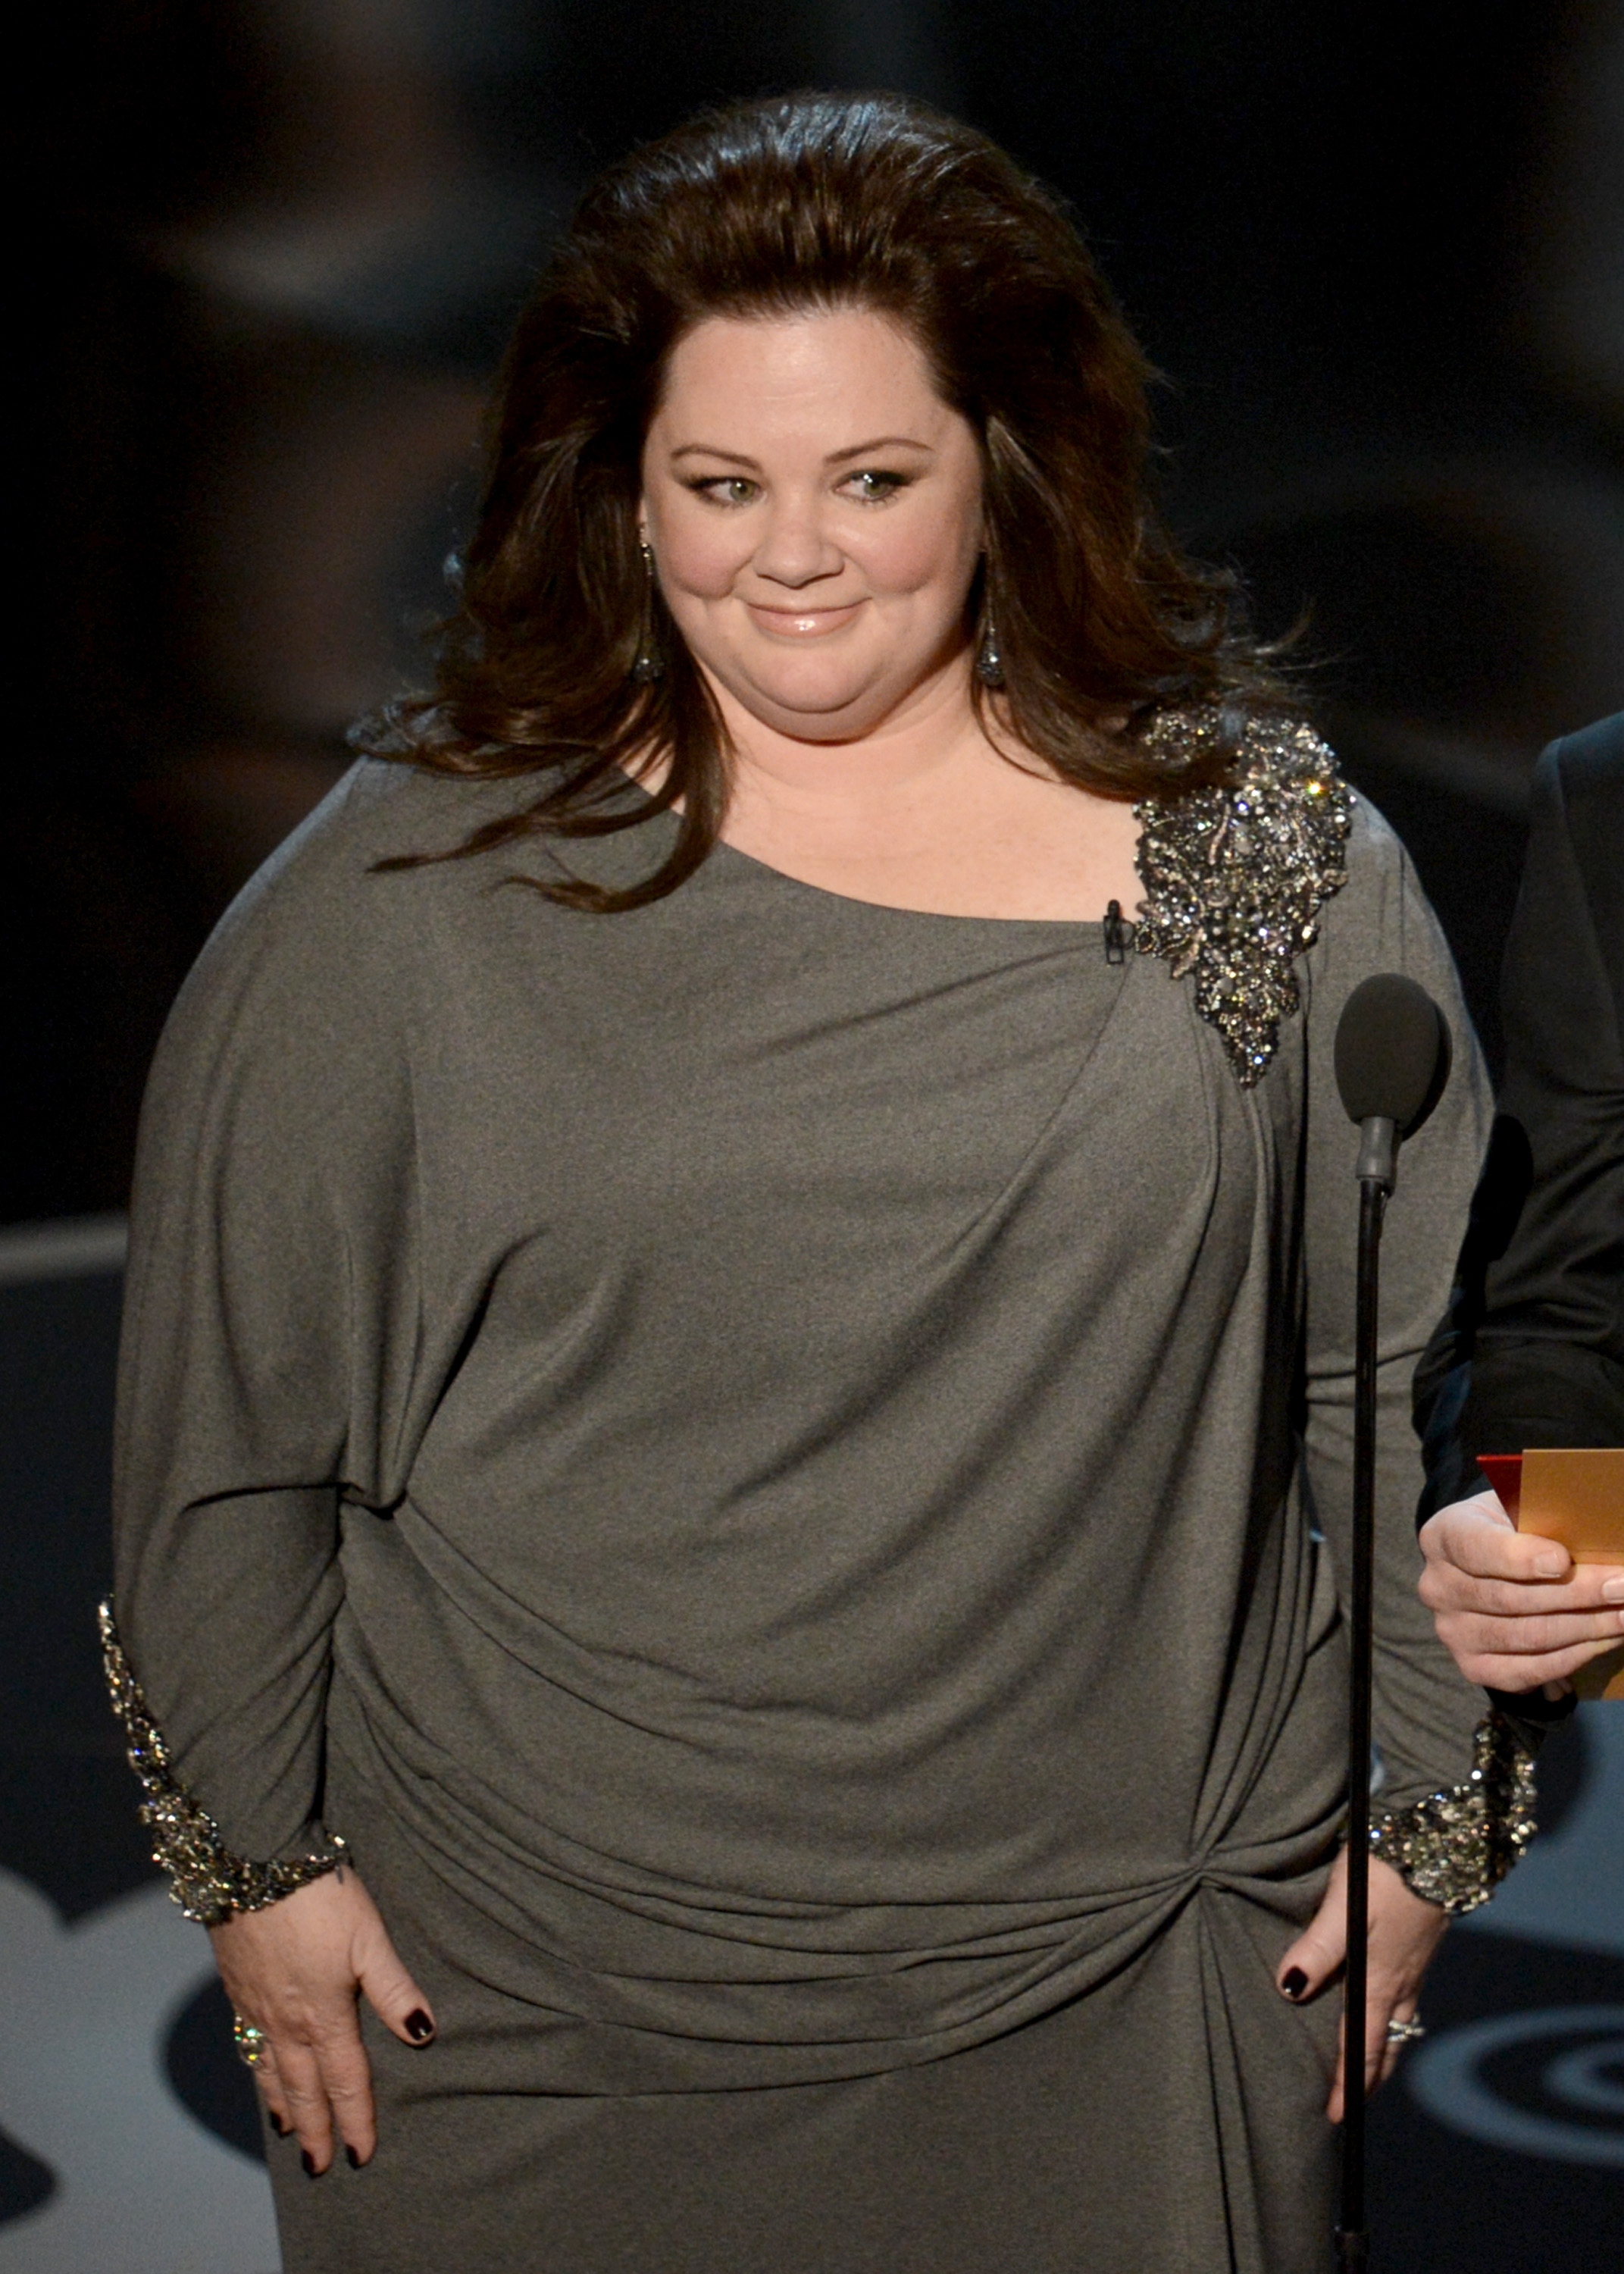 Melissa McCarthy present onstage during the Oscars on February 24, 2013 in Hollywood, California | Source: Getty Images